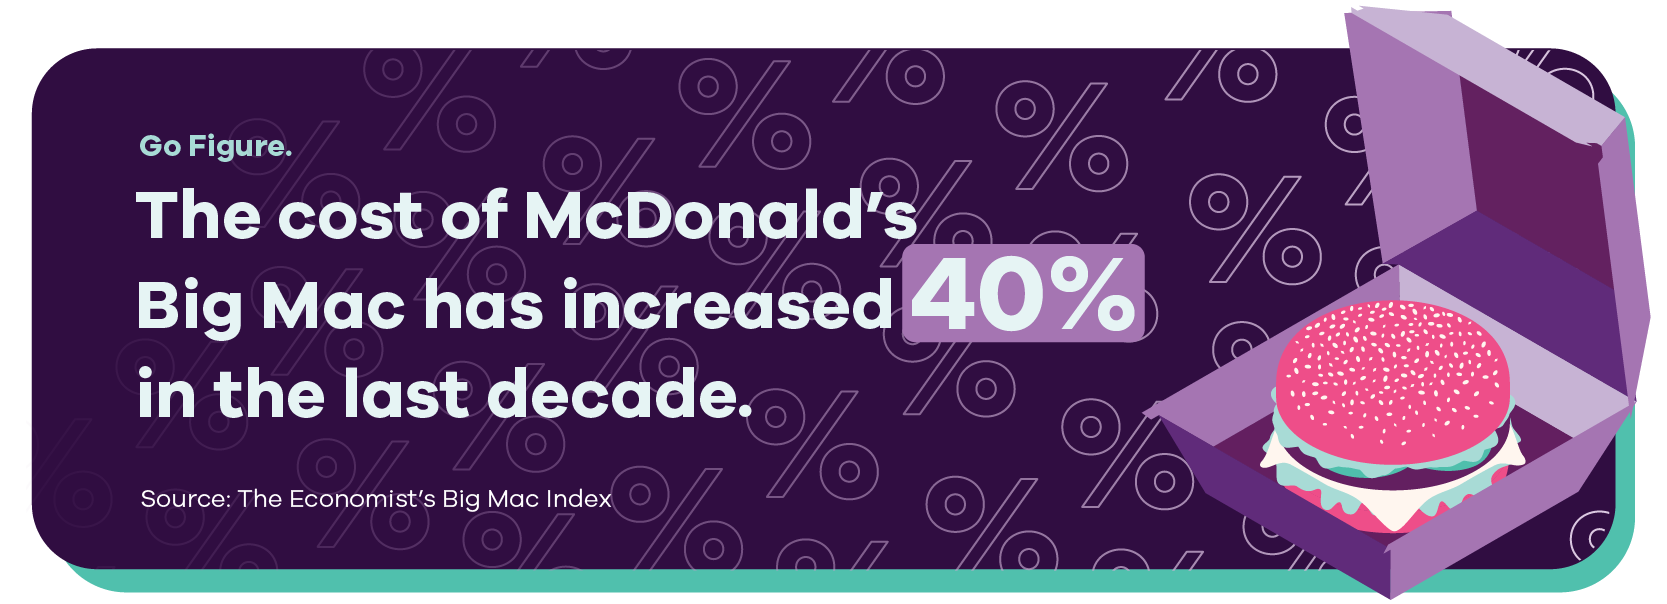 Illustration of a hamburger in a to-go box with text overlay: Go Figure. The cost of McDonald’s Big Mac has increased 40% in the last decade. Source: The Economist’s Big Mac Index.